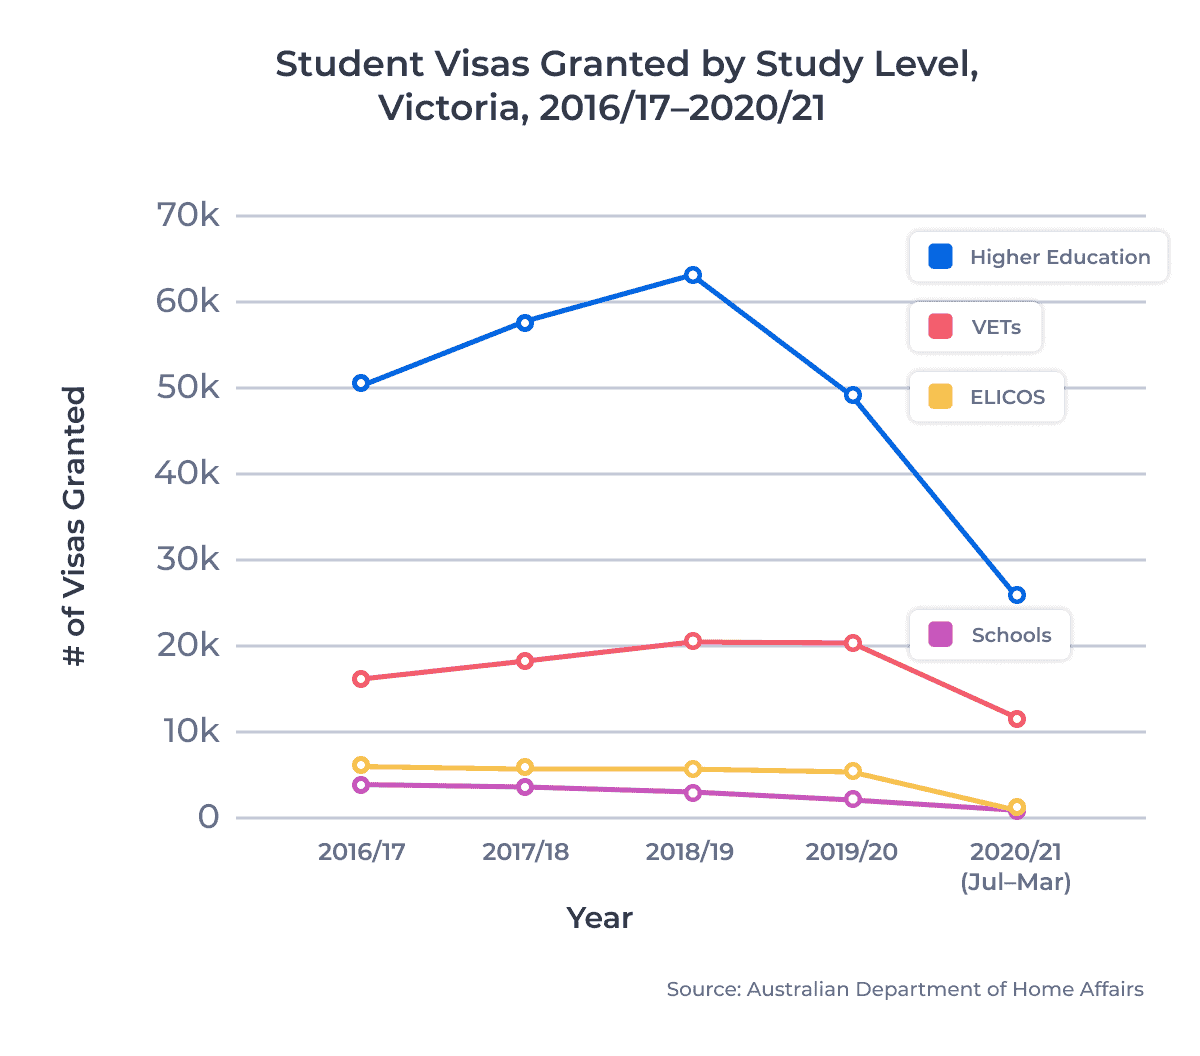 Student Visas Granted by Study Level, Victoria, 2016/17â2020/21